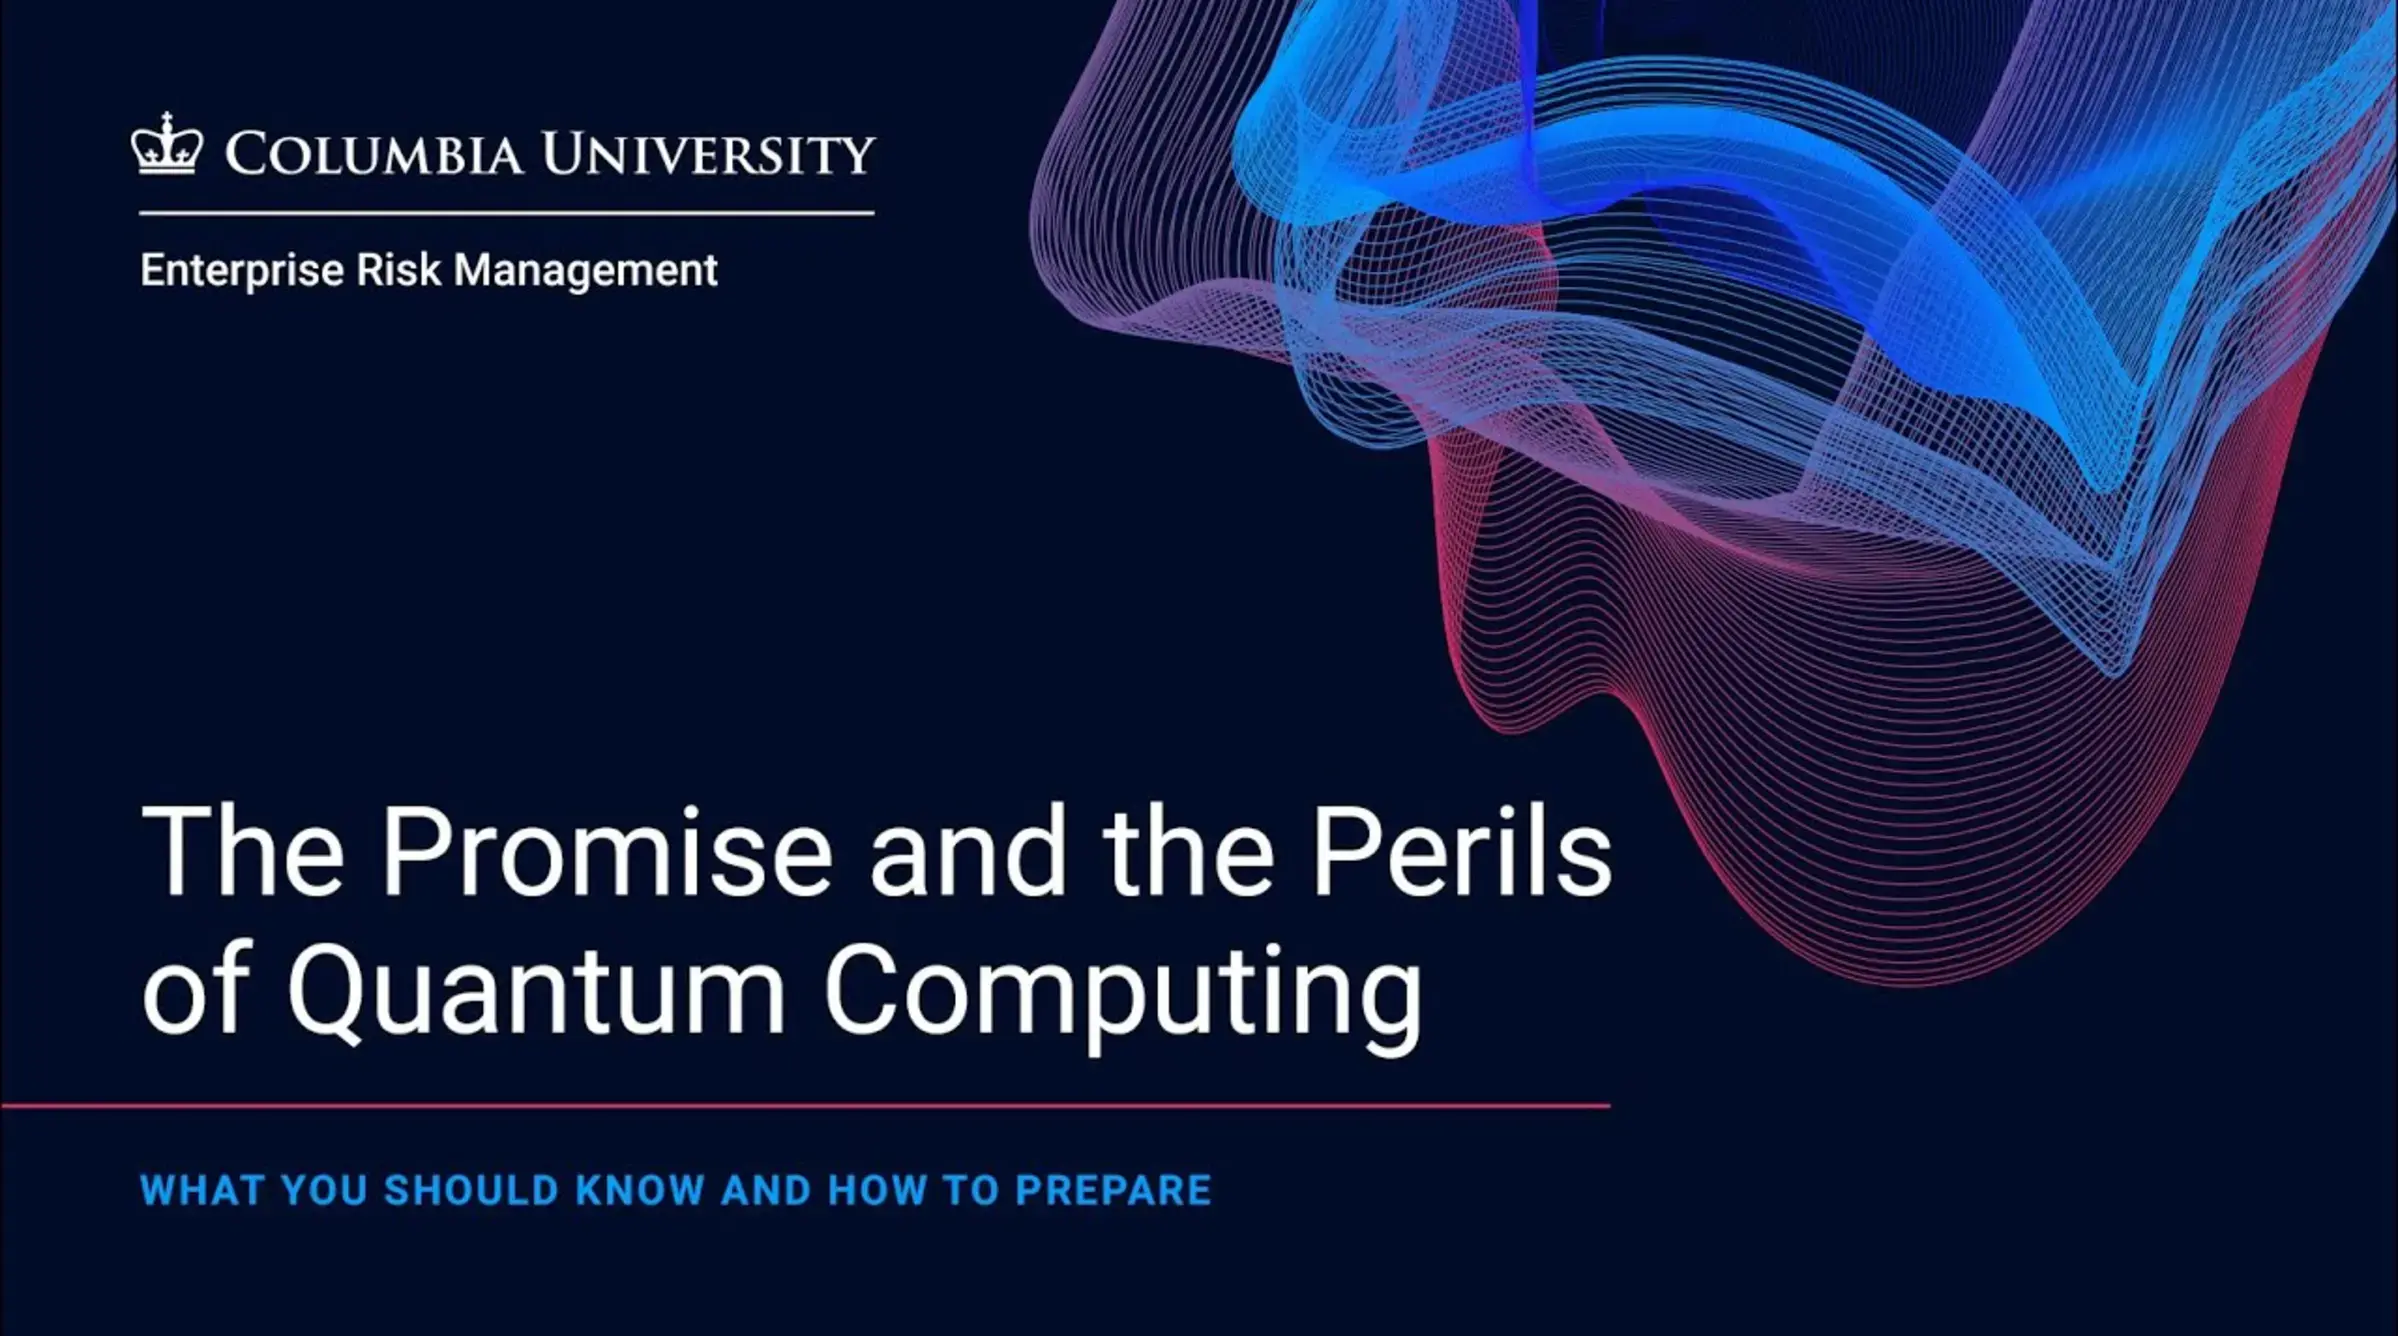 ERM Event - The Promise and the Perils of Quantum Computing - Oct 2021